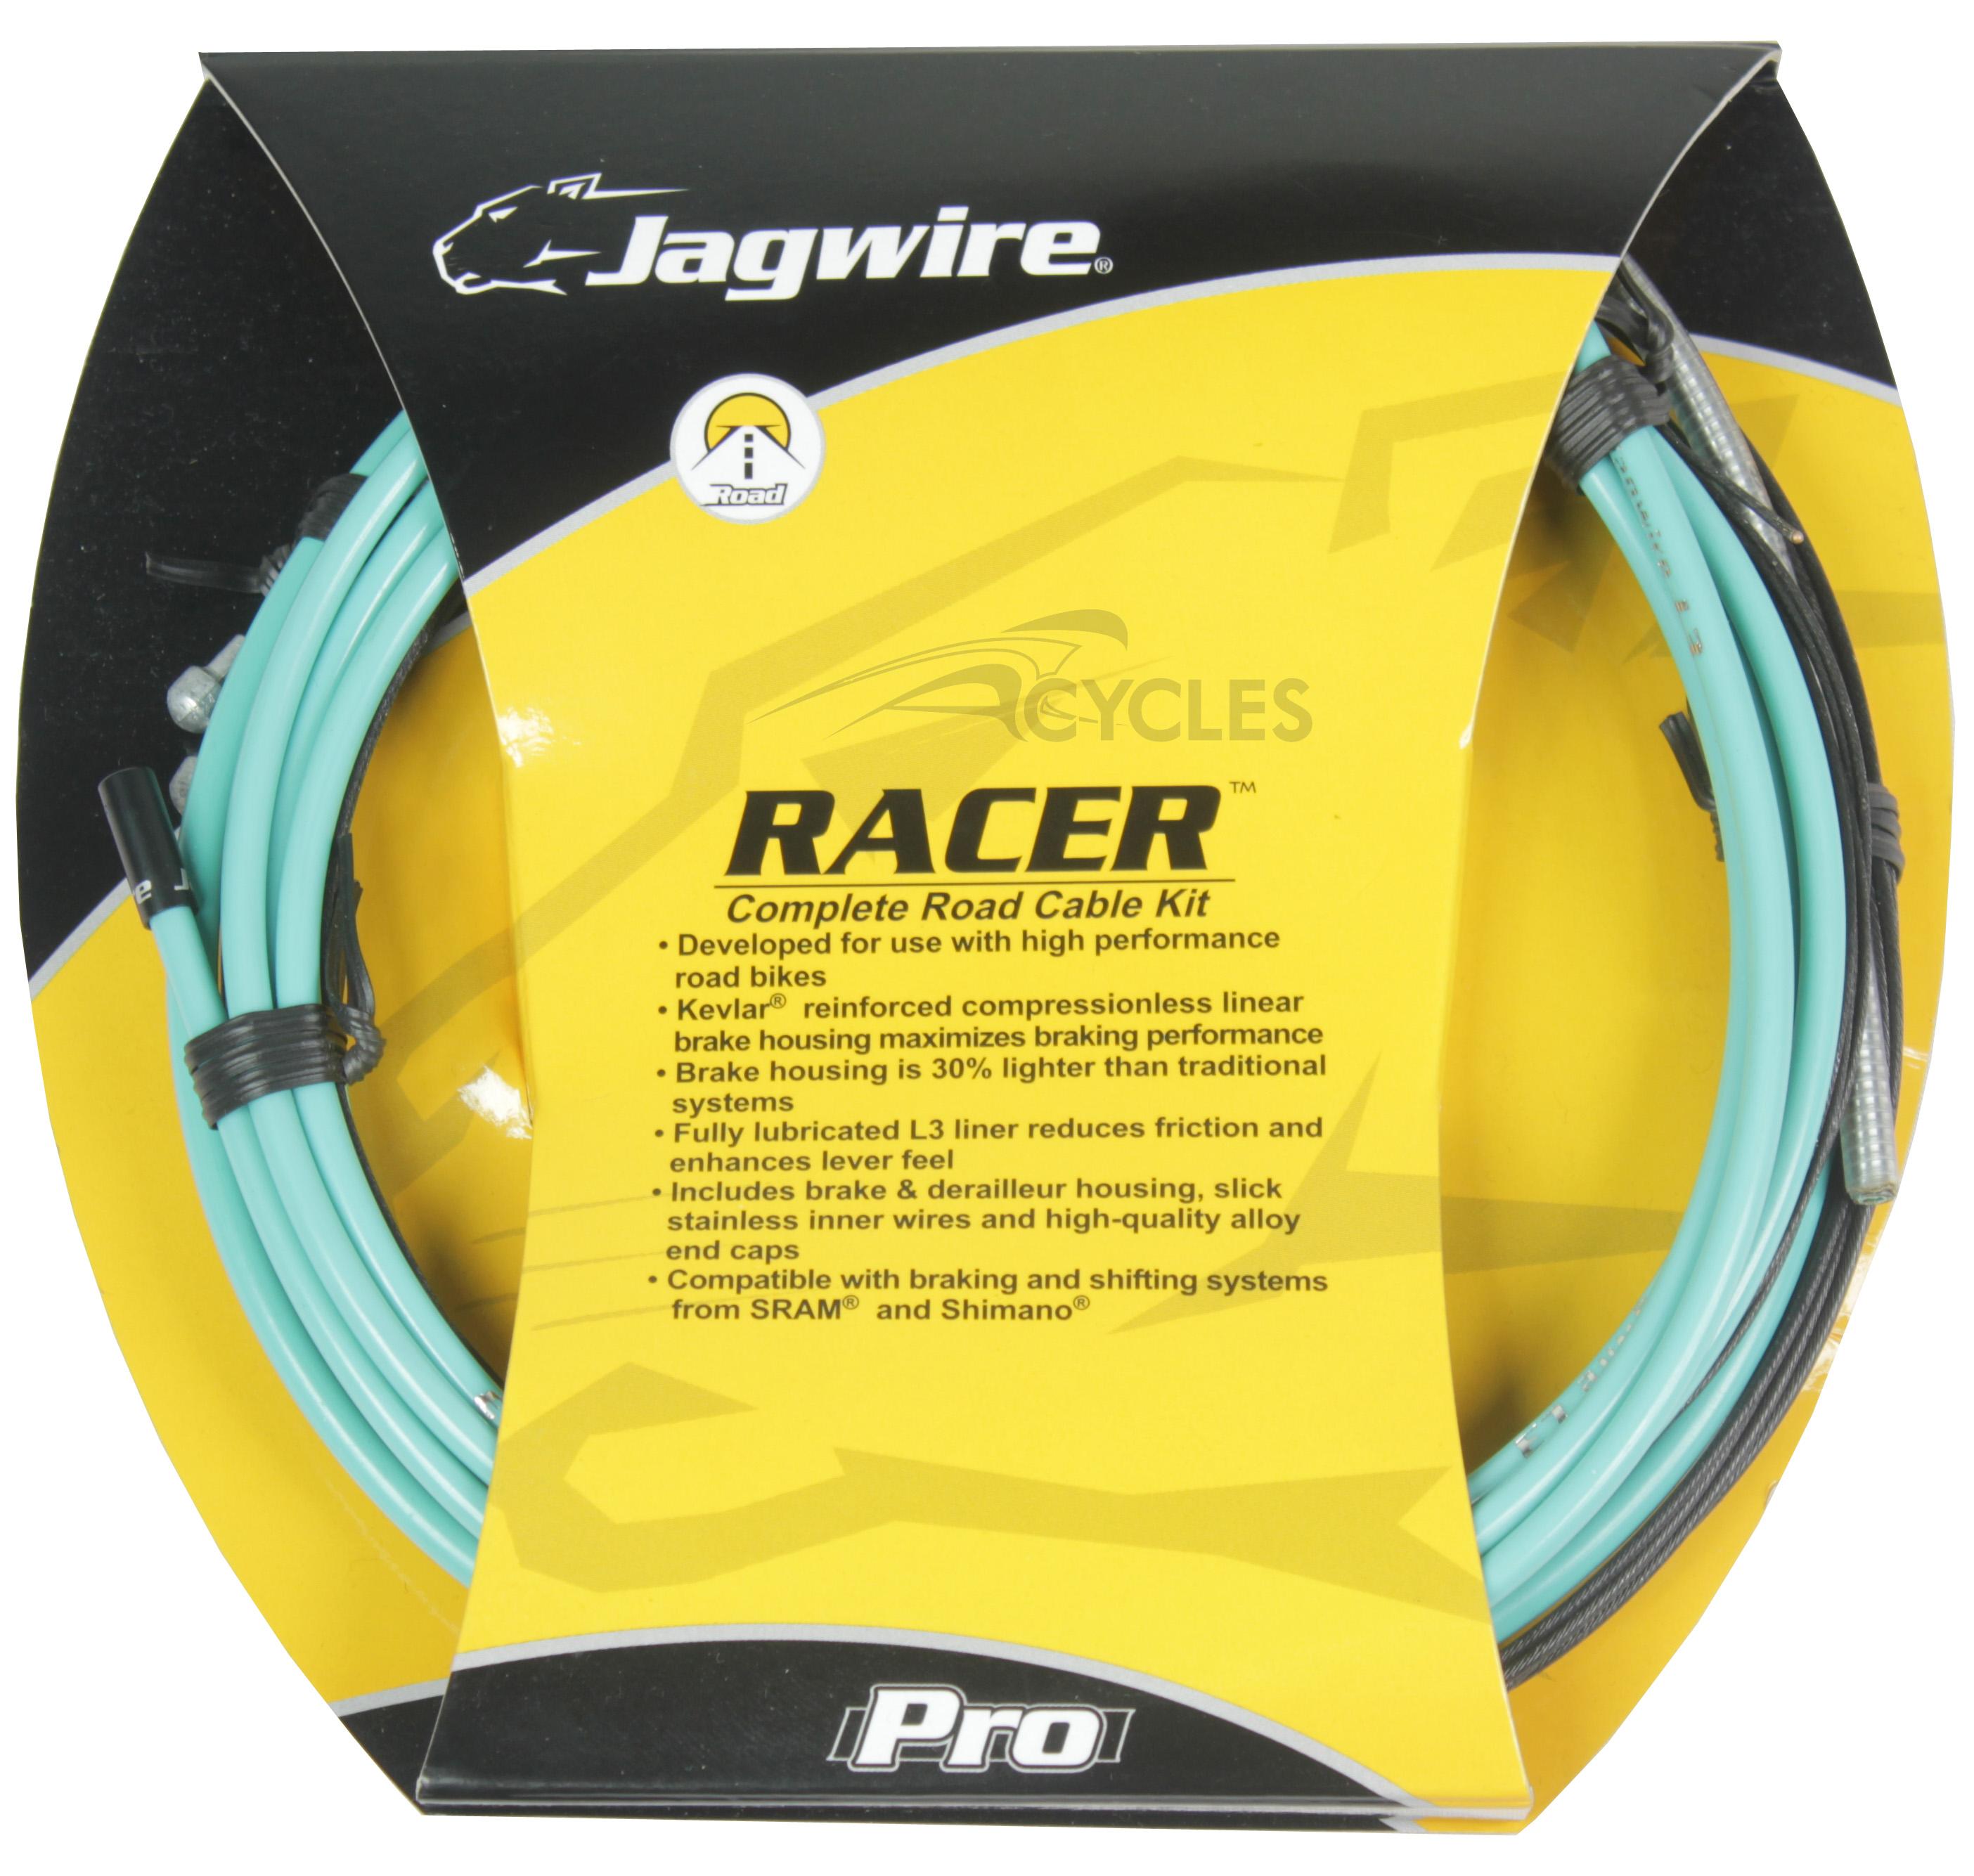 Foto Kit Jagwire Racer Completo Cables Funda Frenos y Cambio Verde Bianchi